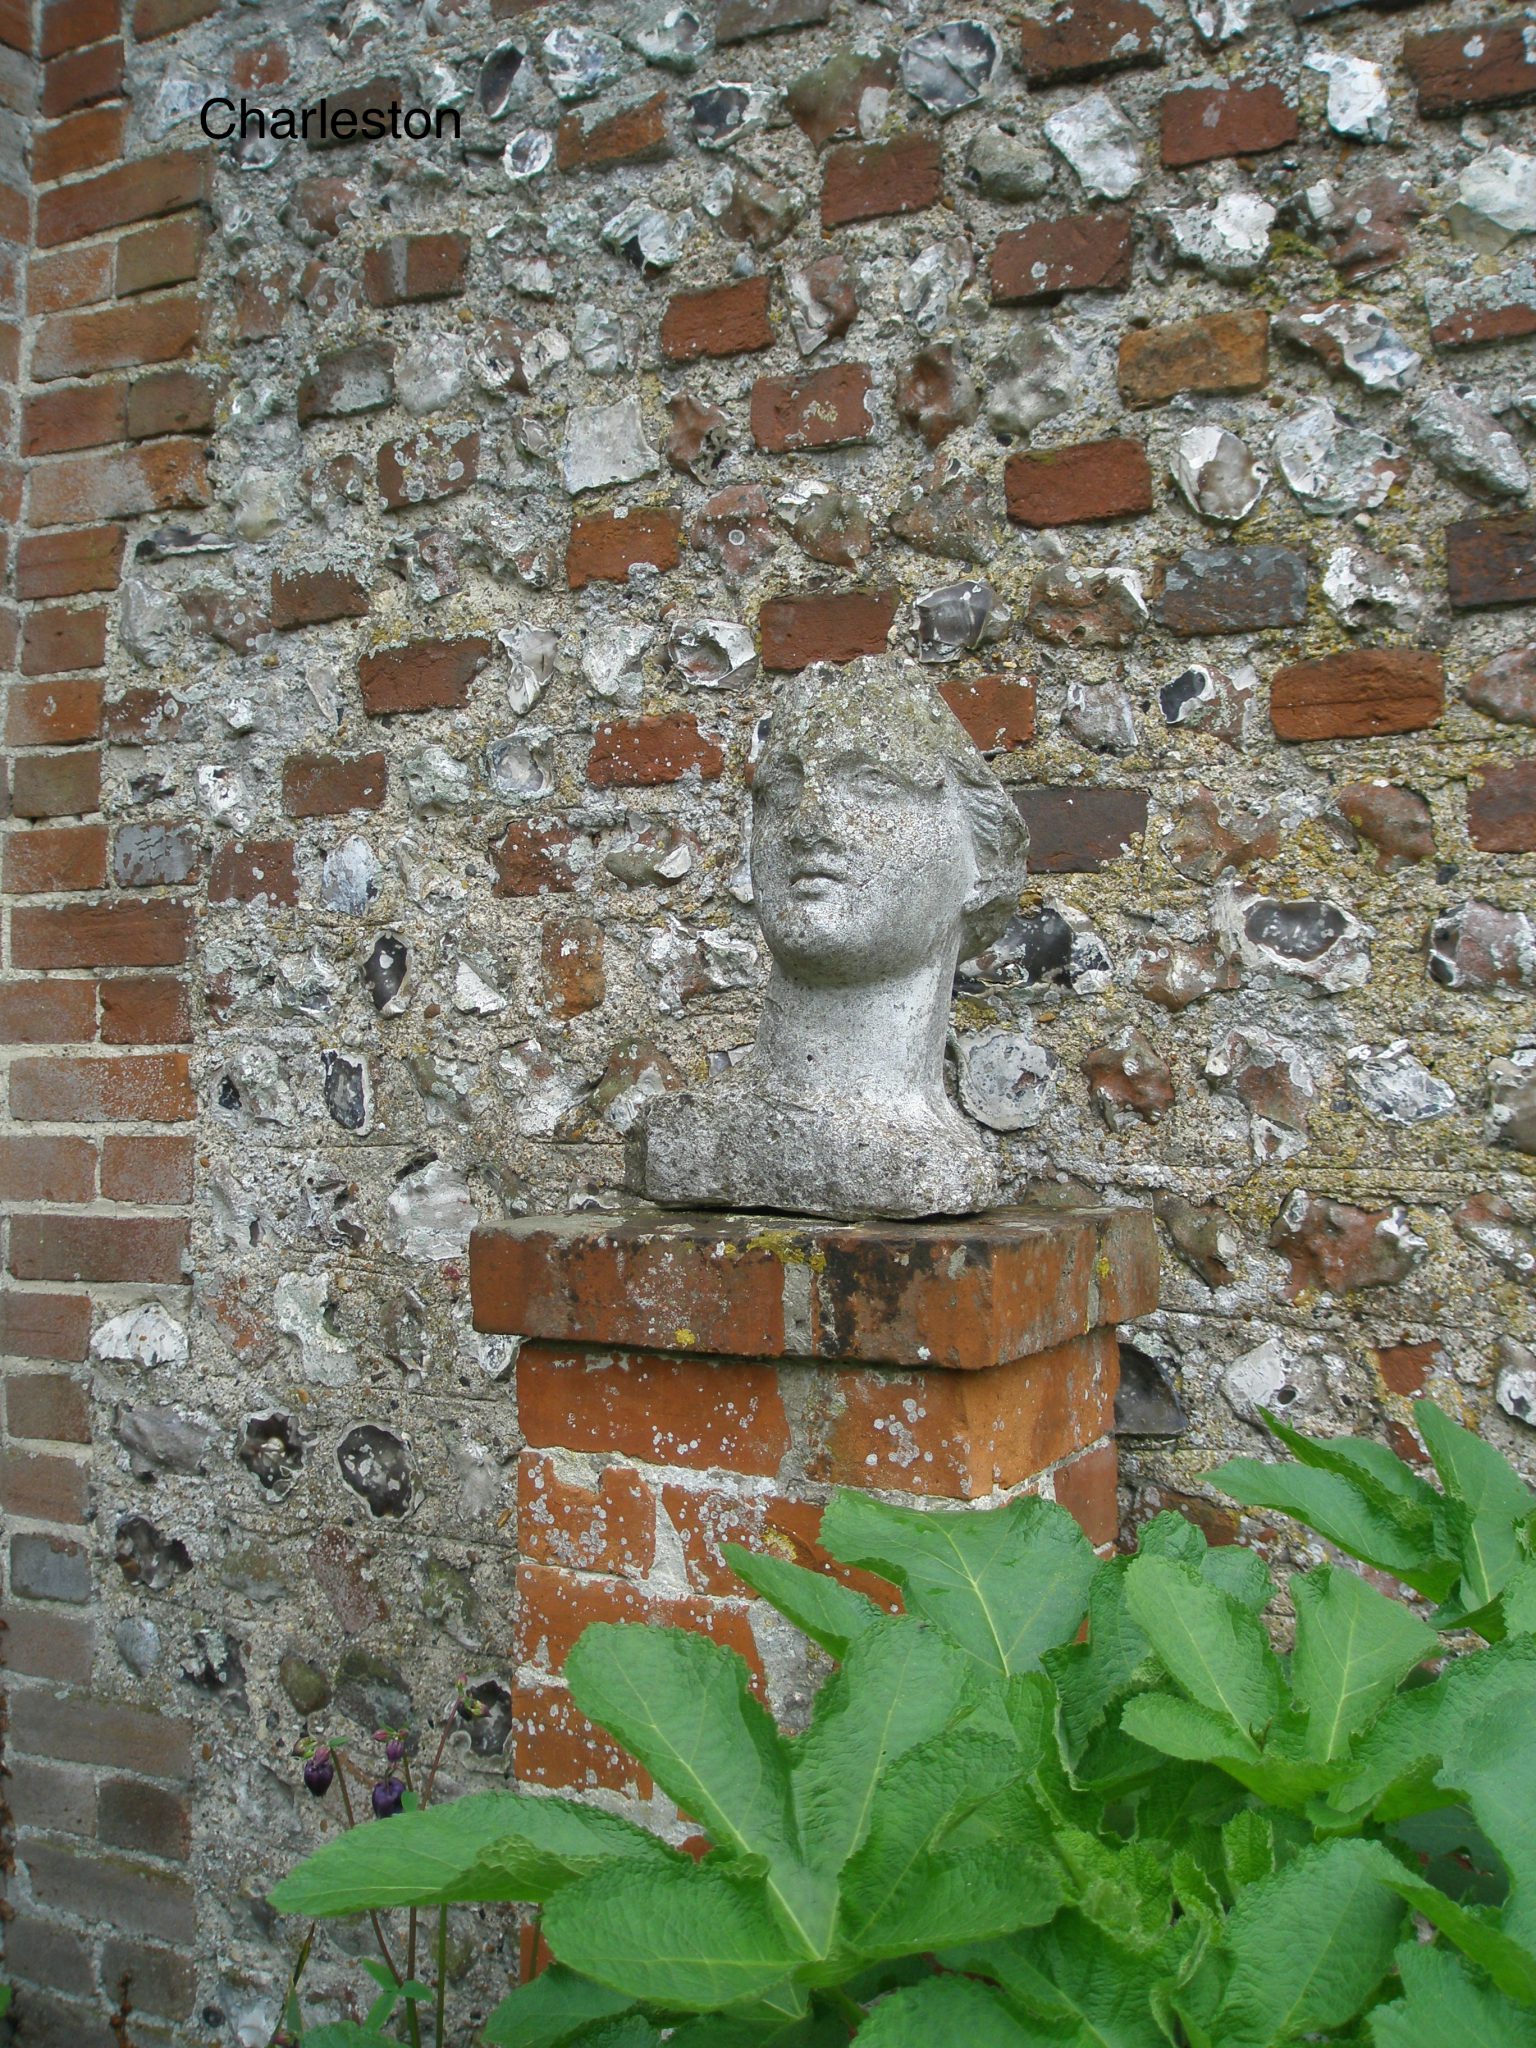 A Bust is mounted, just inside the entry to the Walled Garden. This wall is built with typical Southeastern England's combination of brick and broken flint stones.